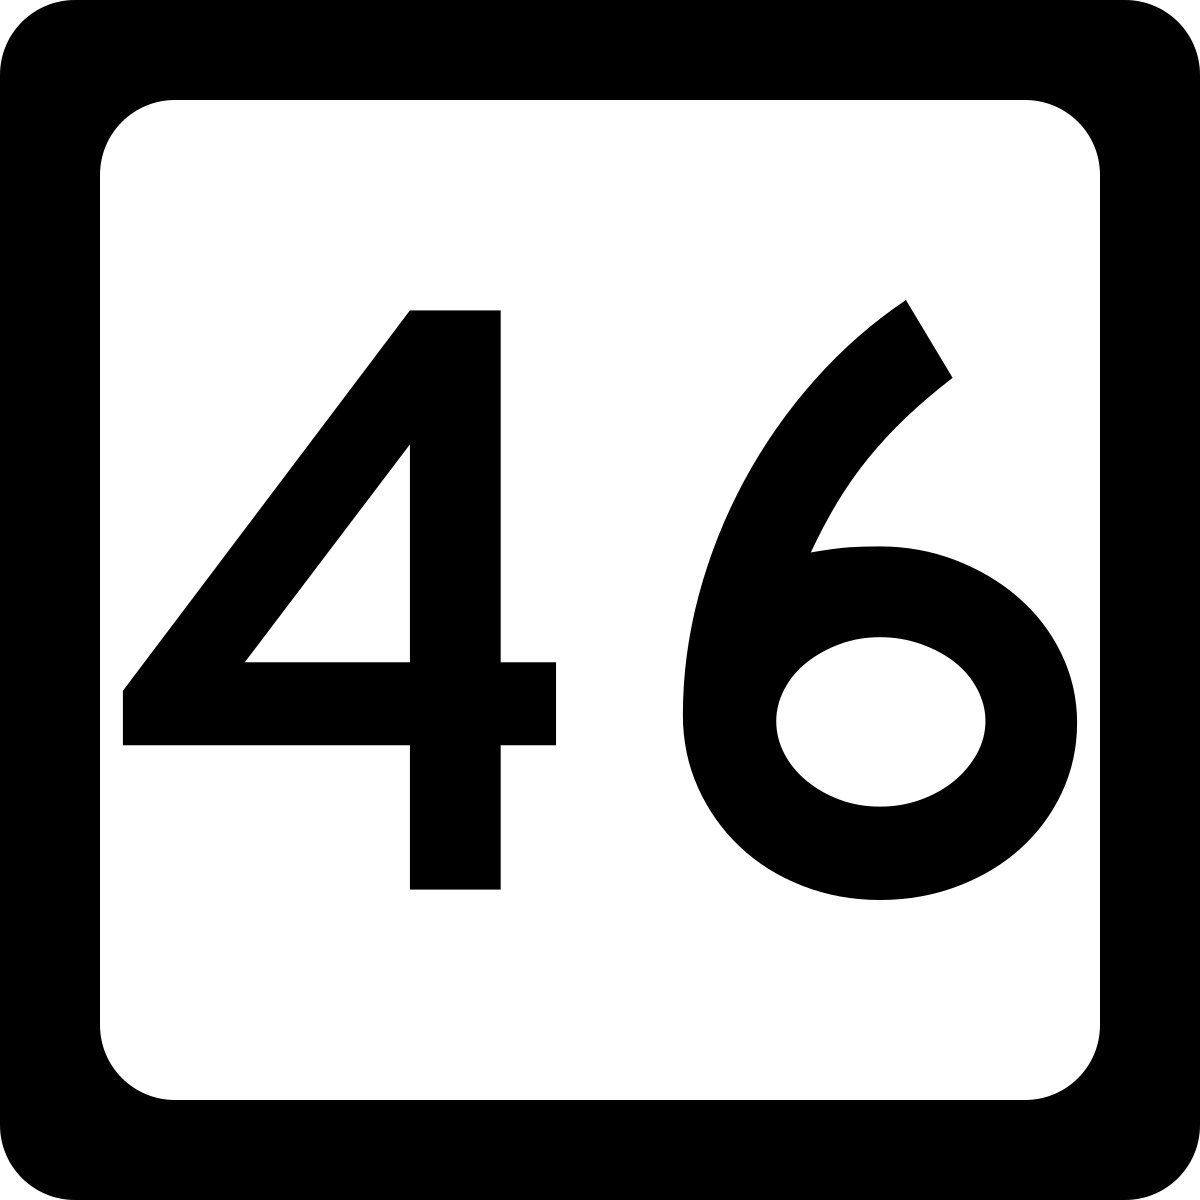 West Virginia Route 46 - Wikipedia